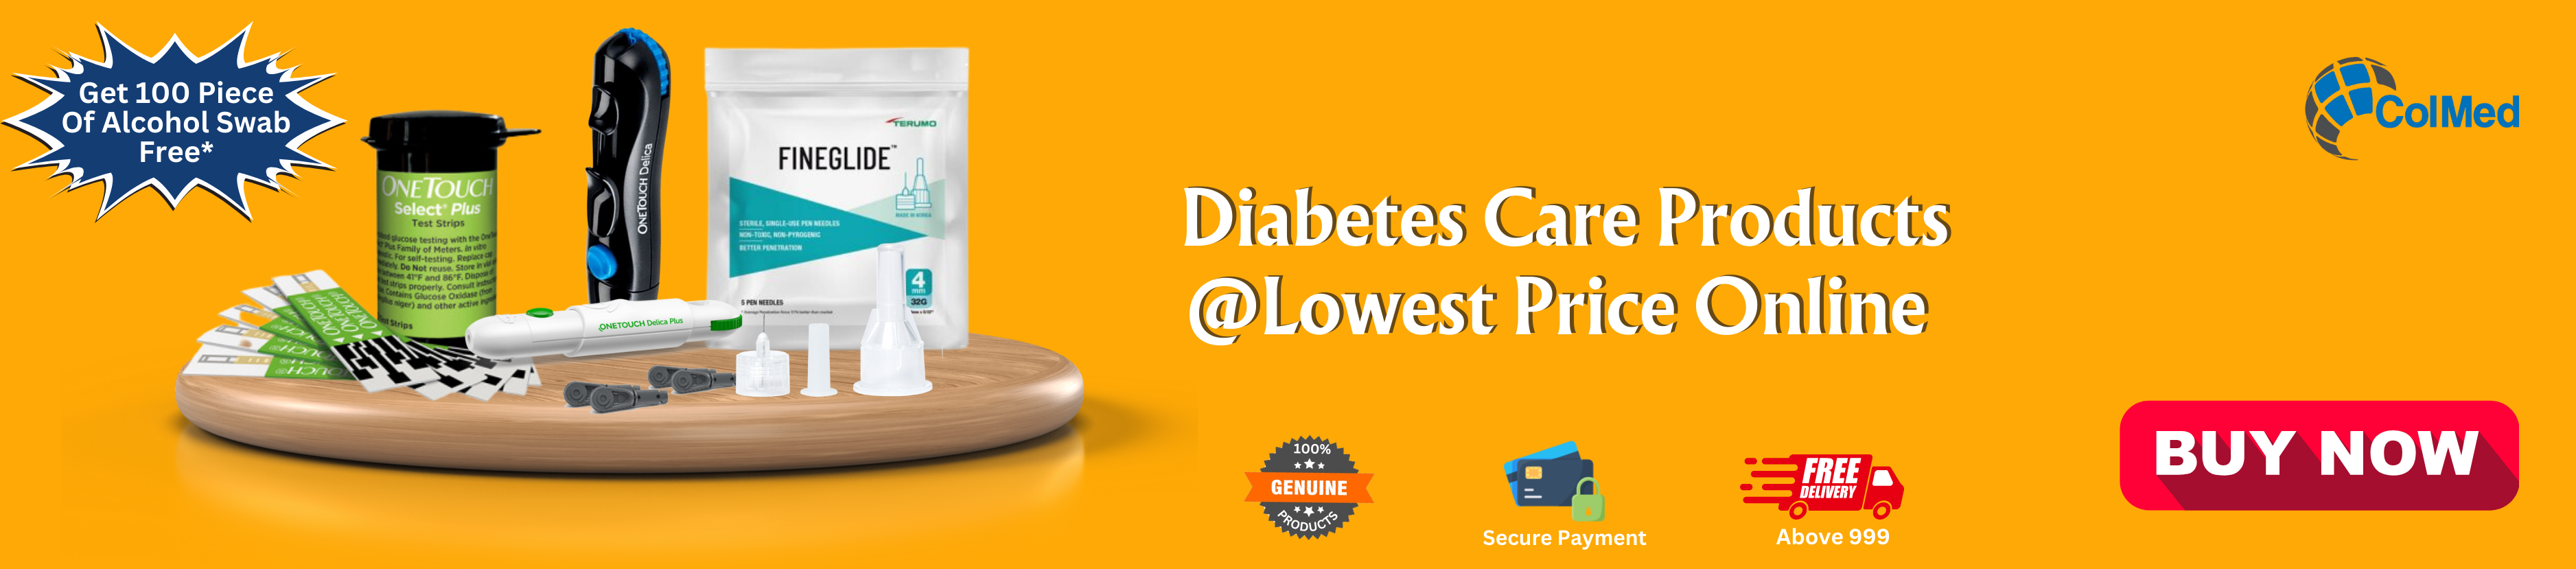 Diabetes Care Products 